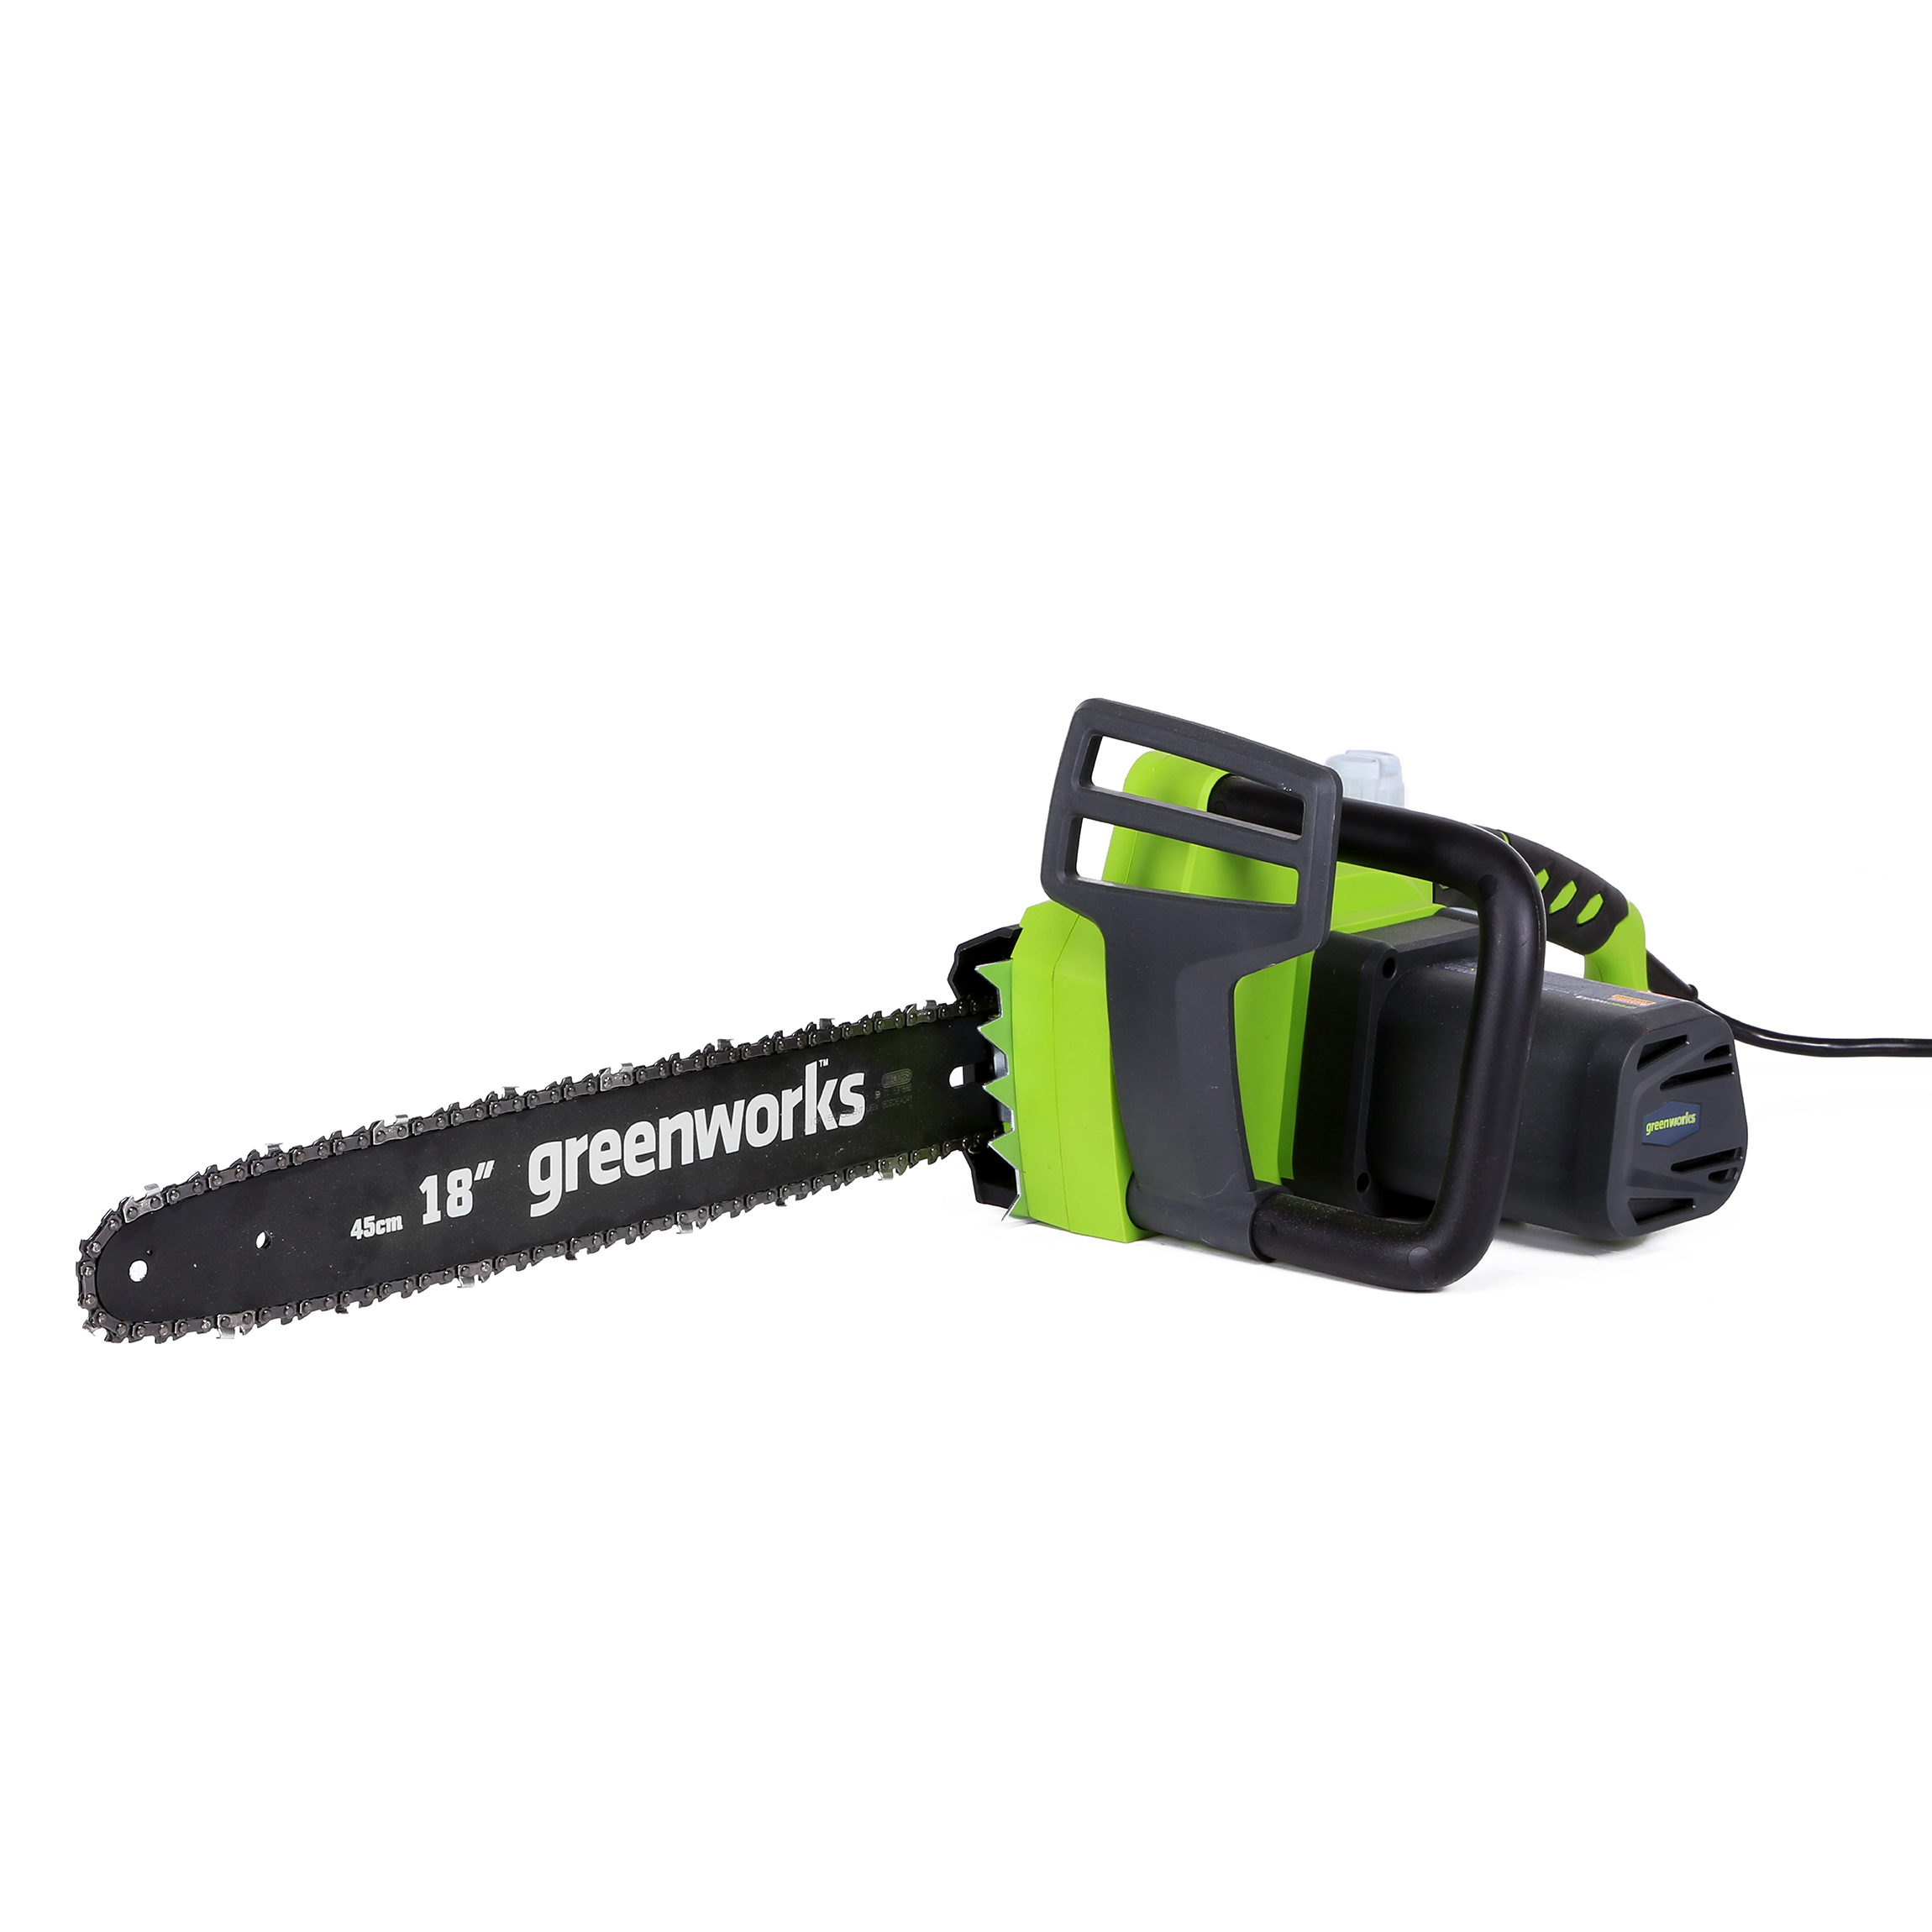 Greenworks 14.5 Amp 18" Corded Electric Chainsaw 20332 - image 1 of 14